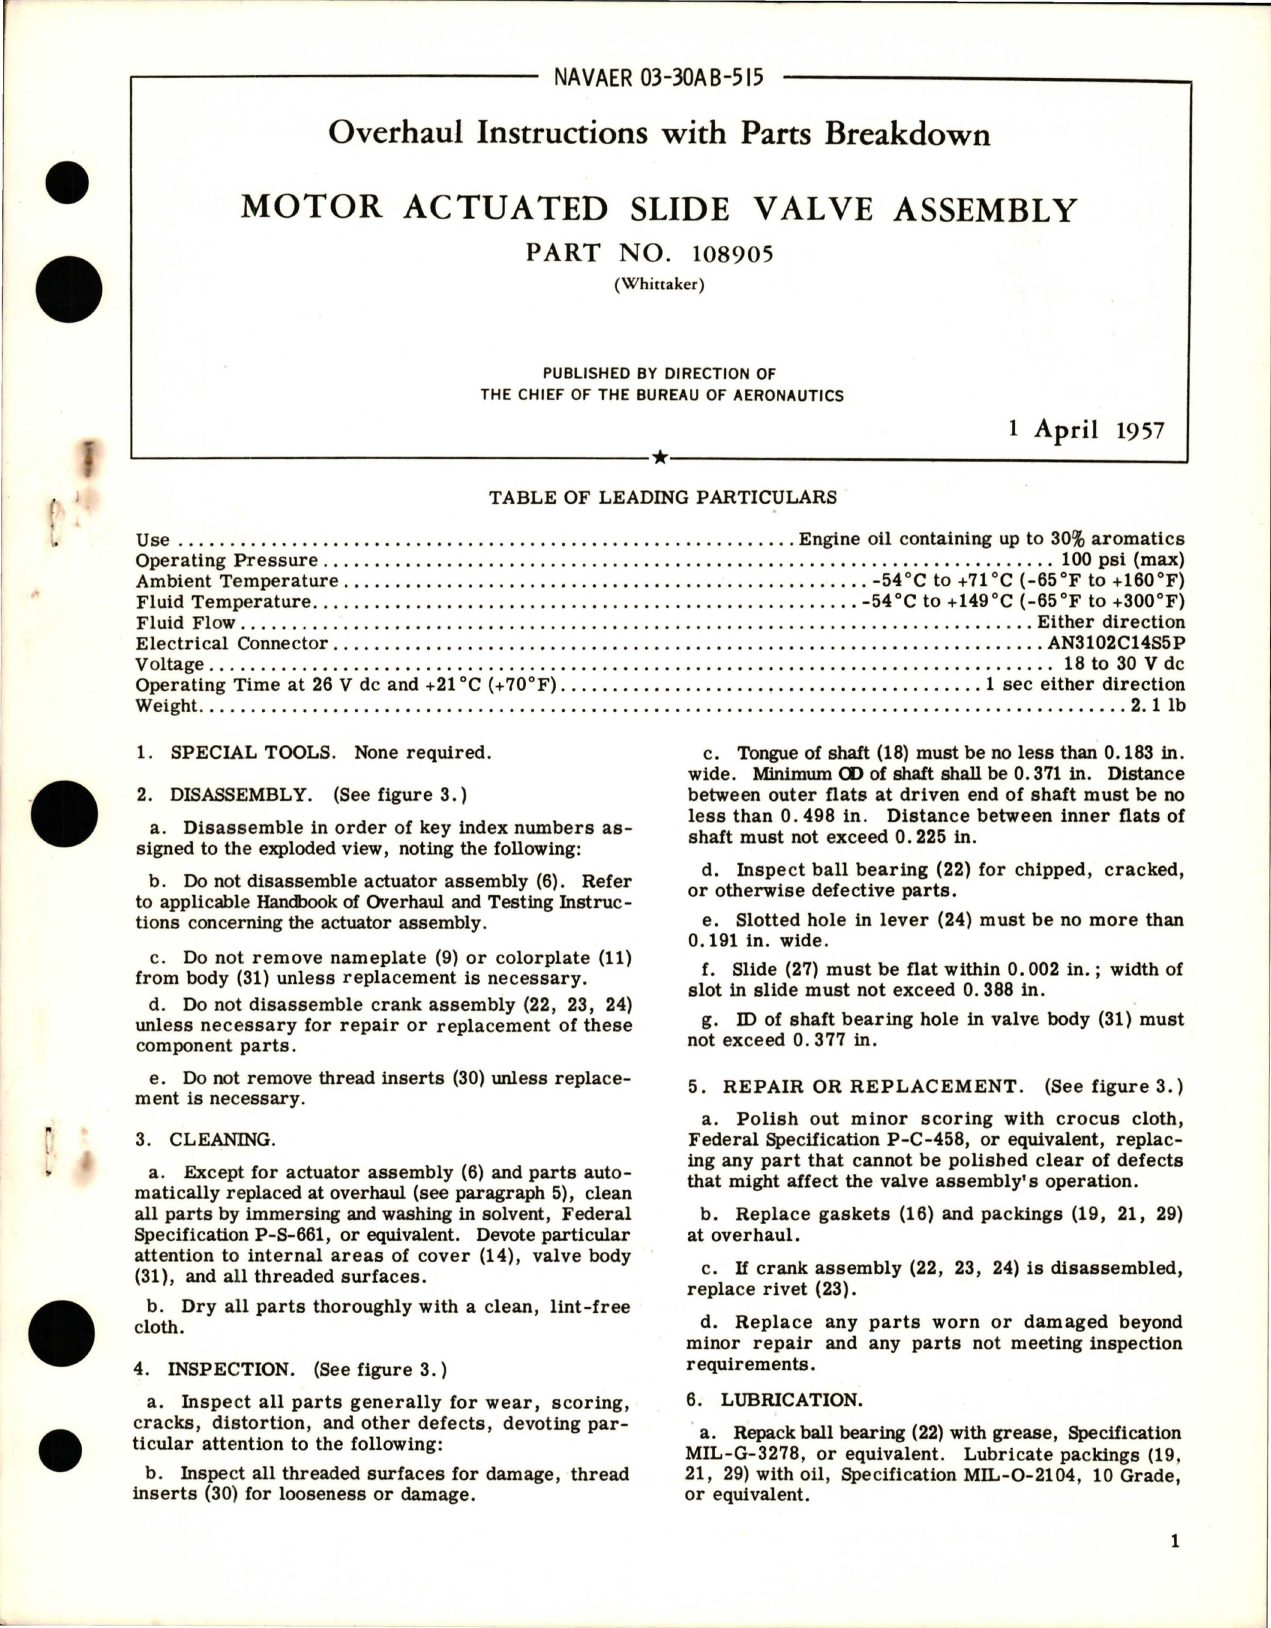 Sample page 1 from AirCorps Library document: Overhaul Instructions with Parts Breakdown for Motor Actuated Slide Valve Assembly - Part 108905